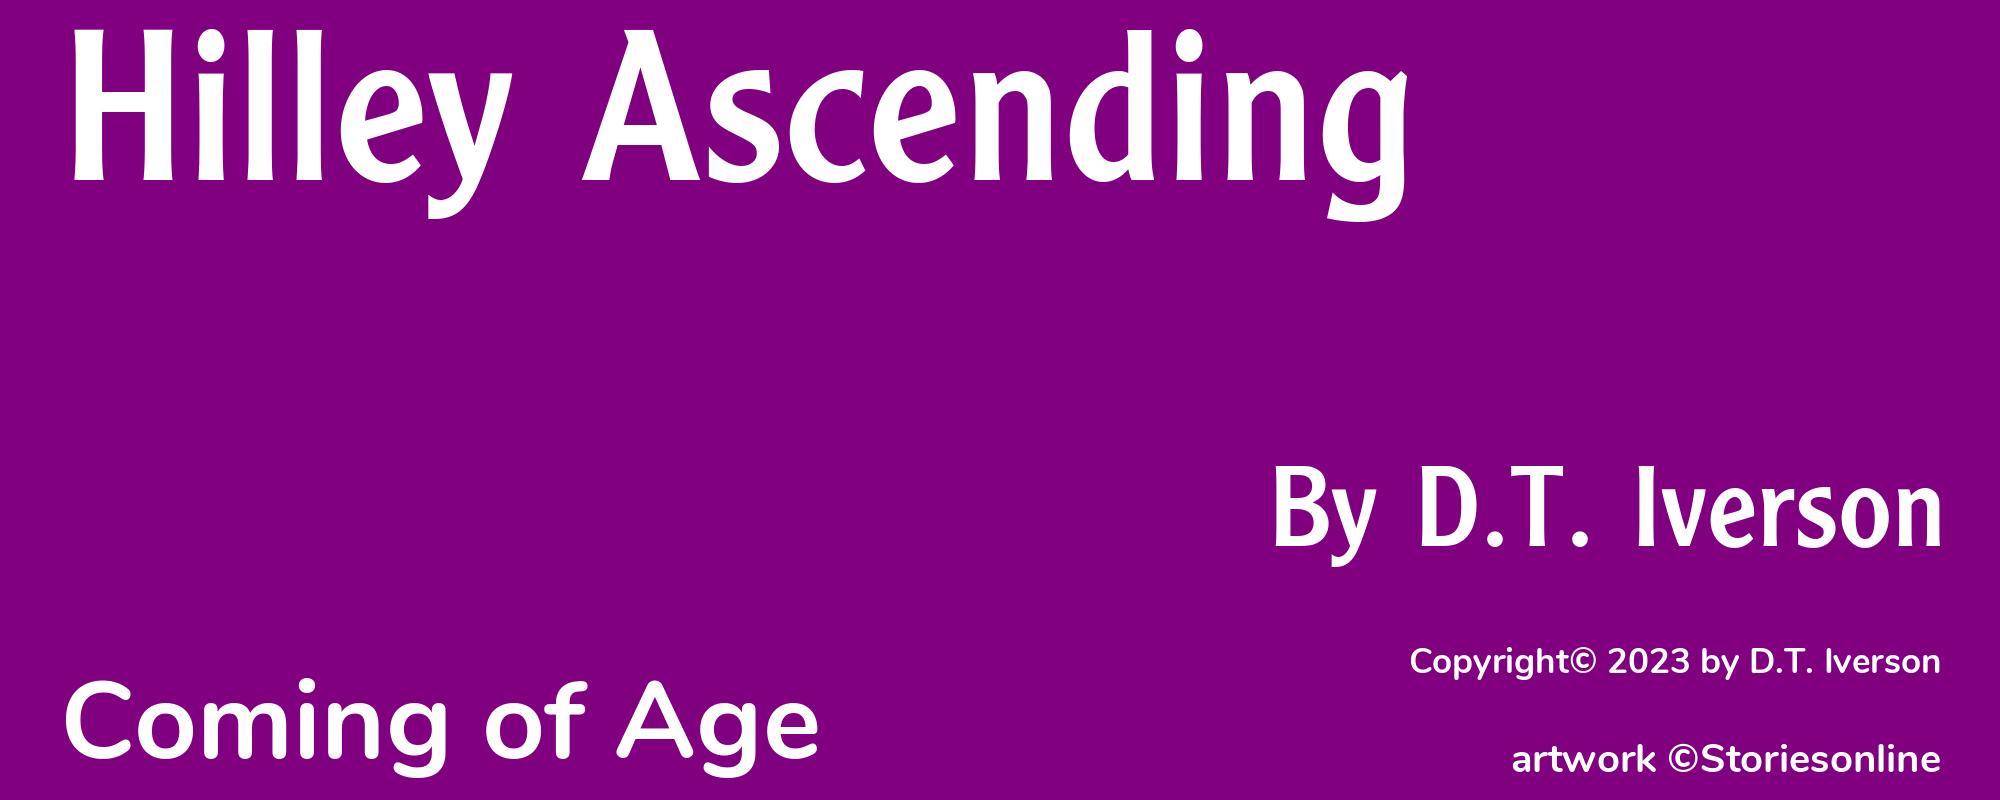 Hilley Ascending - Cover